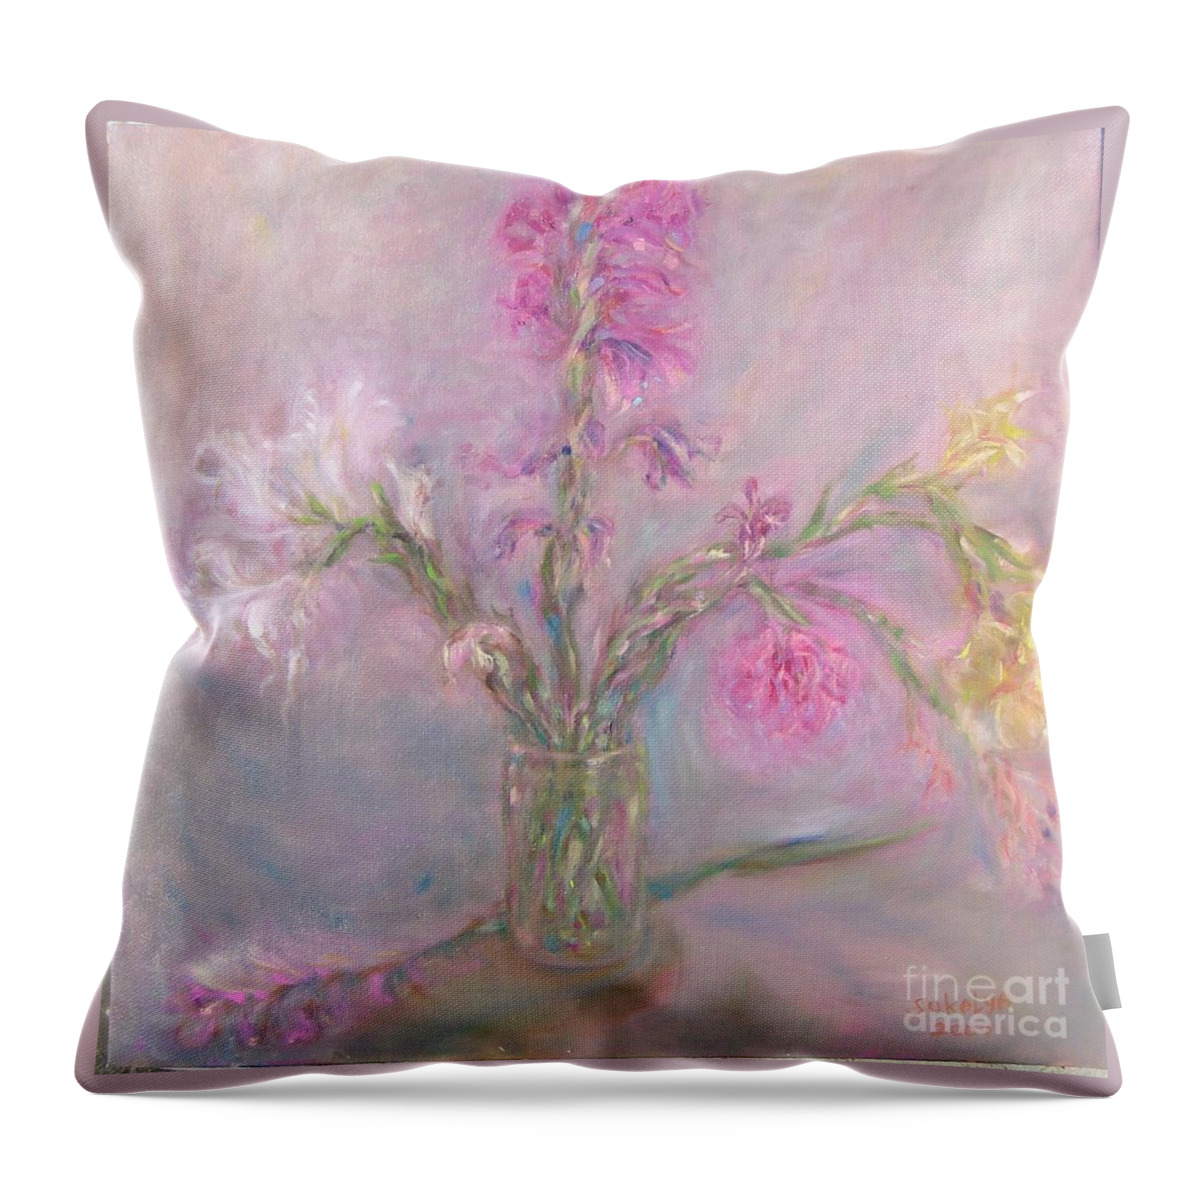 Pink Throw Pillow featuring the painting Recollection of The Dreamy Bloom by Sukalya Chearanantana